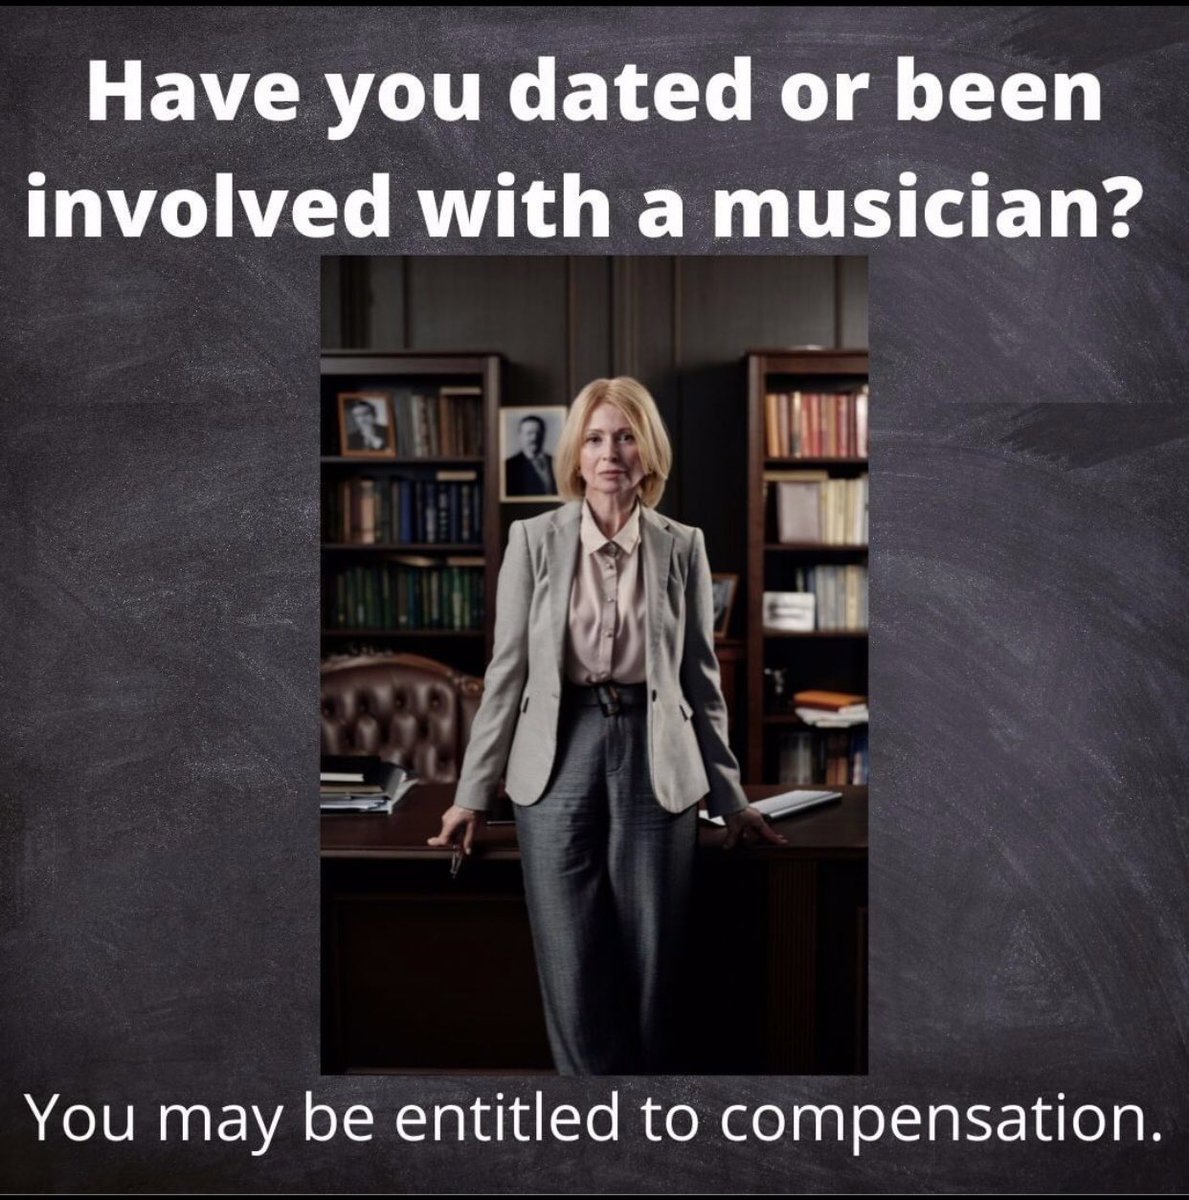 I wish! I’d be a rich woman! Note to self: no more bass players!